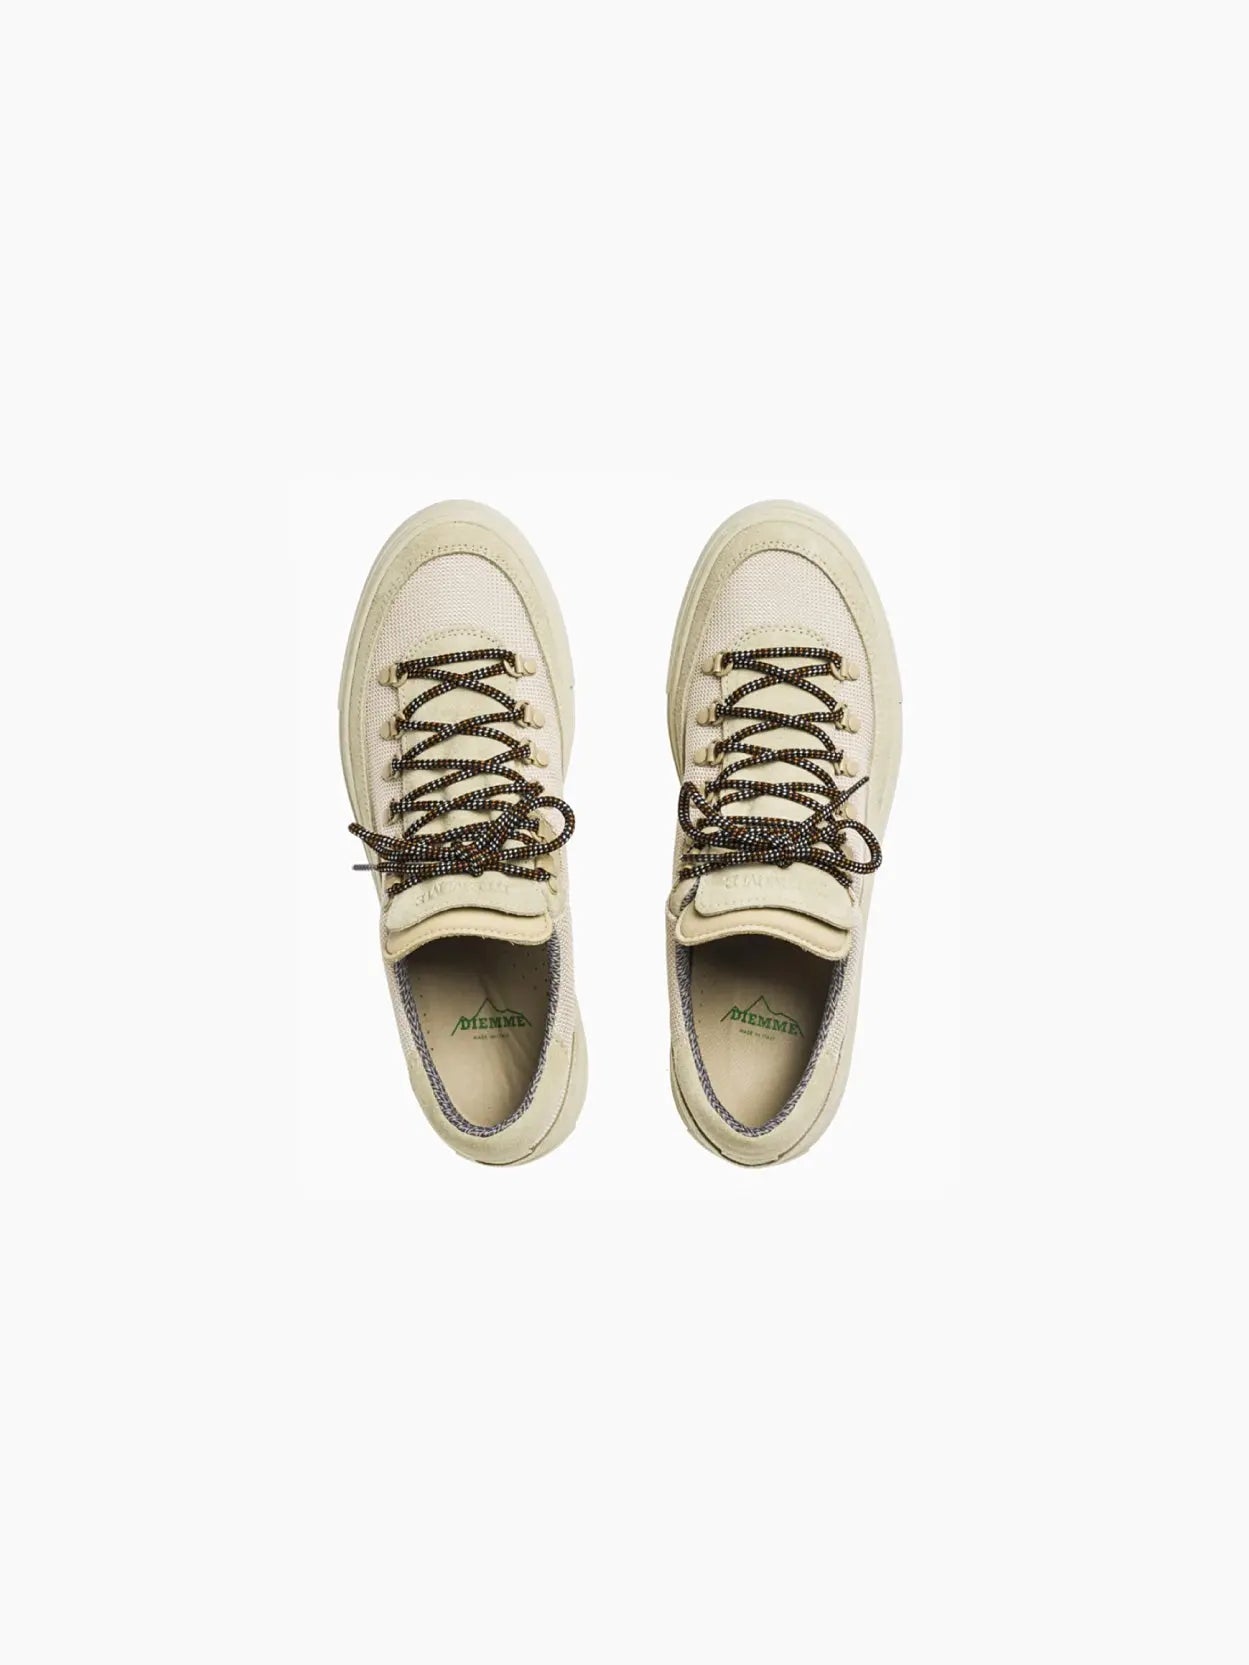 Displayed at Bassalstore in Barcelona, the Diemme Marostica Low Ecru boasts a low-top design. The shoe features round, brown and beige laces threaded through metal eyelets. The sole and toe cap are matching beige, and the sneaker has a minimalist style with subtle stitching details.